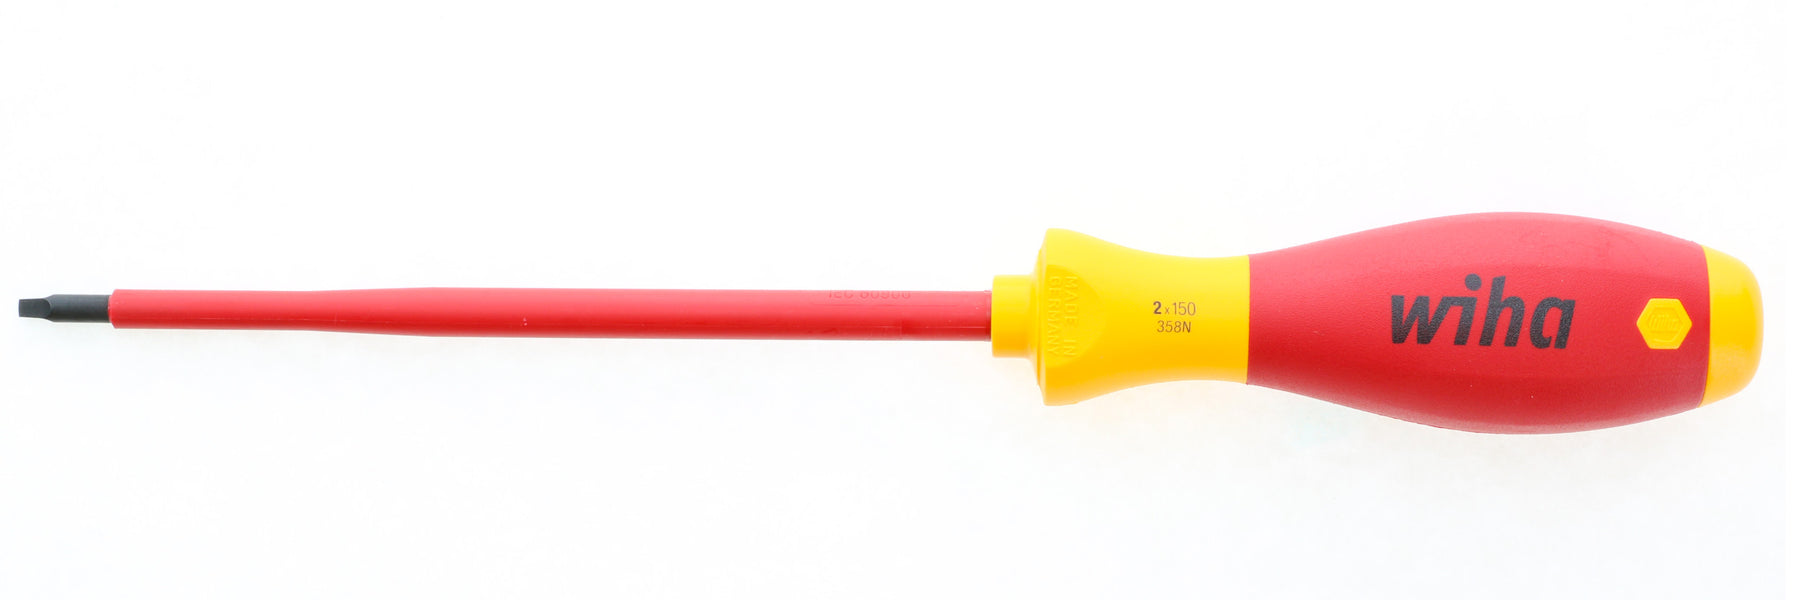 Insulated Square Tip Driver #2 x 150mm